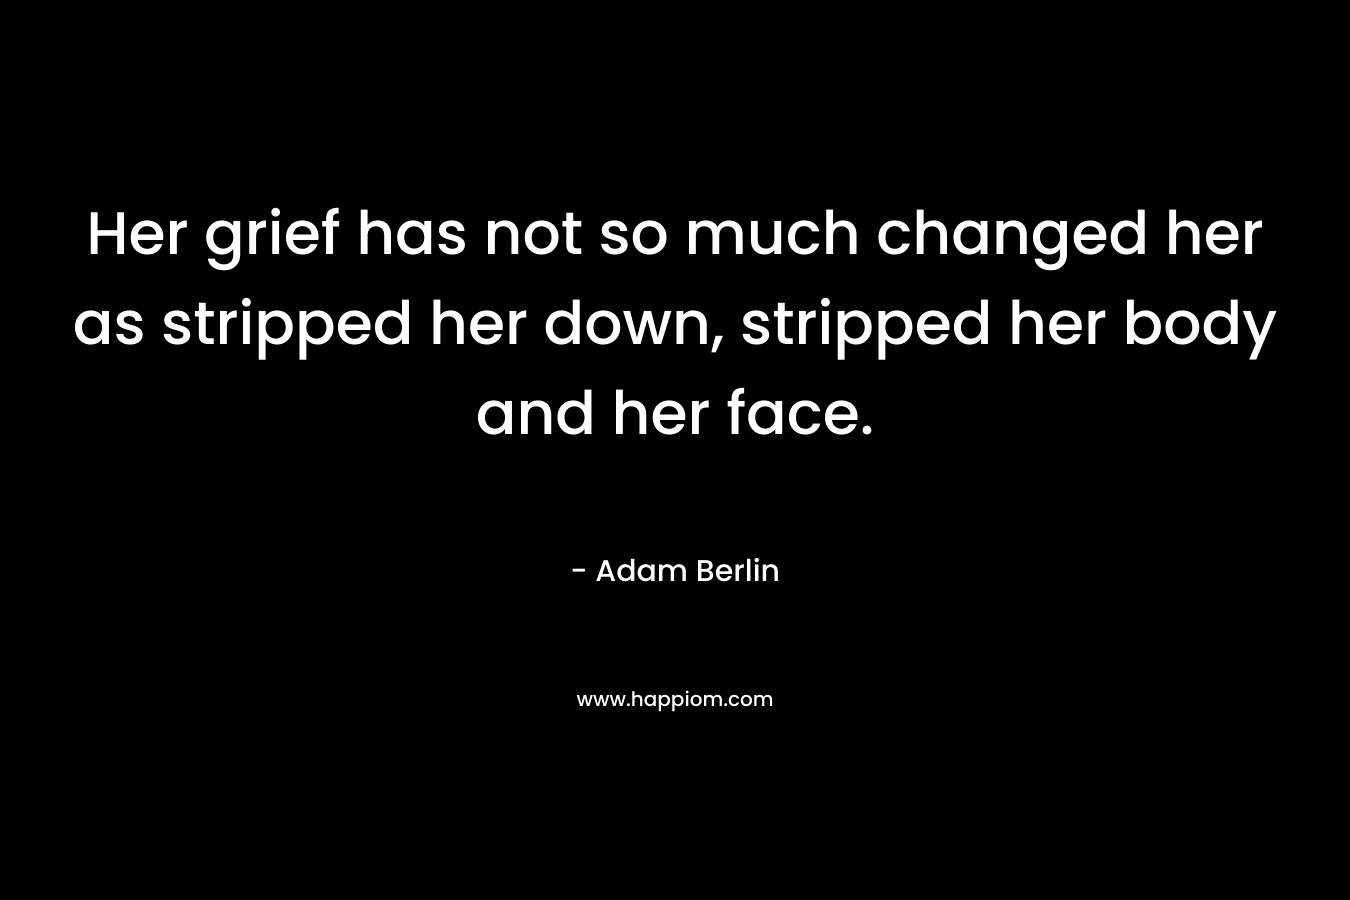 Her grief has not so much changed her as stripped her down, stripped her body and her face.